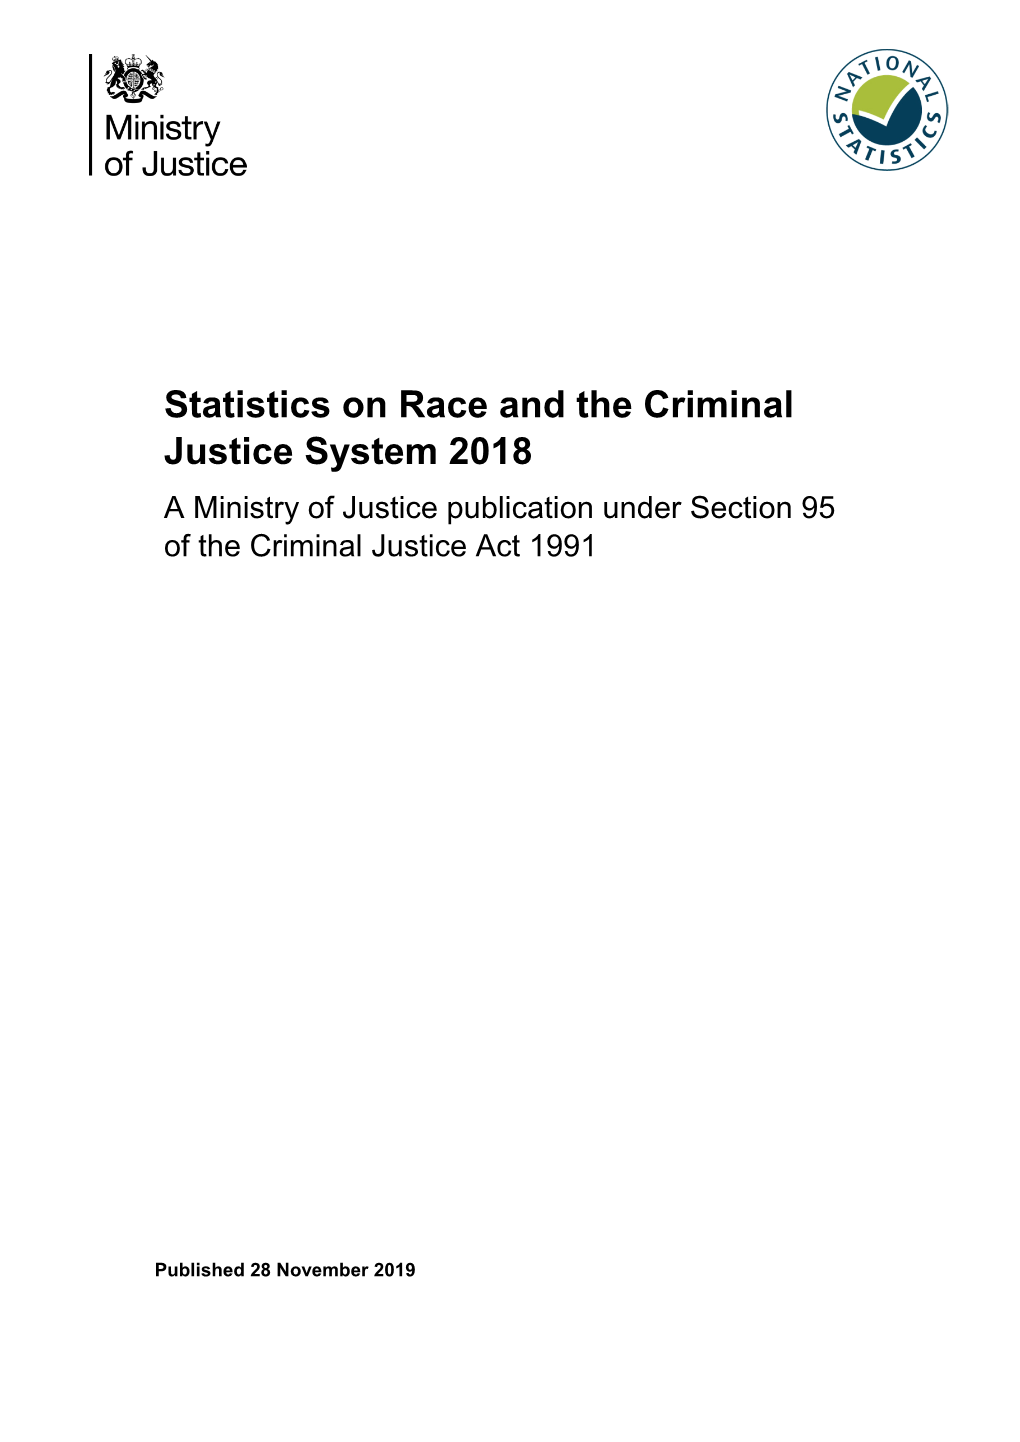 Statistics on Race and the Criminal Justice System 2018 a Ministry of Justice Publication Under Section 95 of the Criminal Justice Act 1991